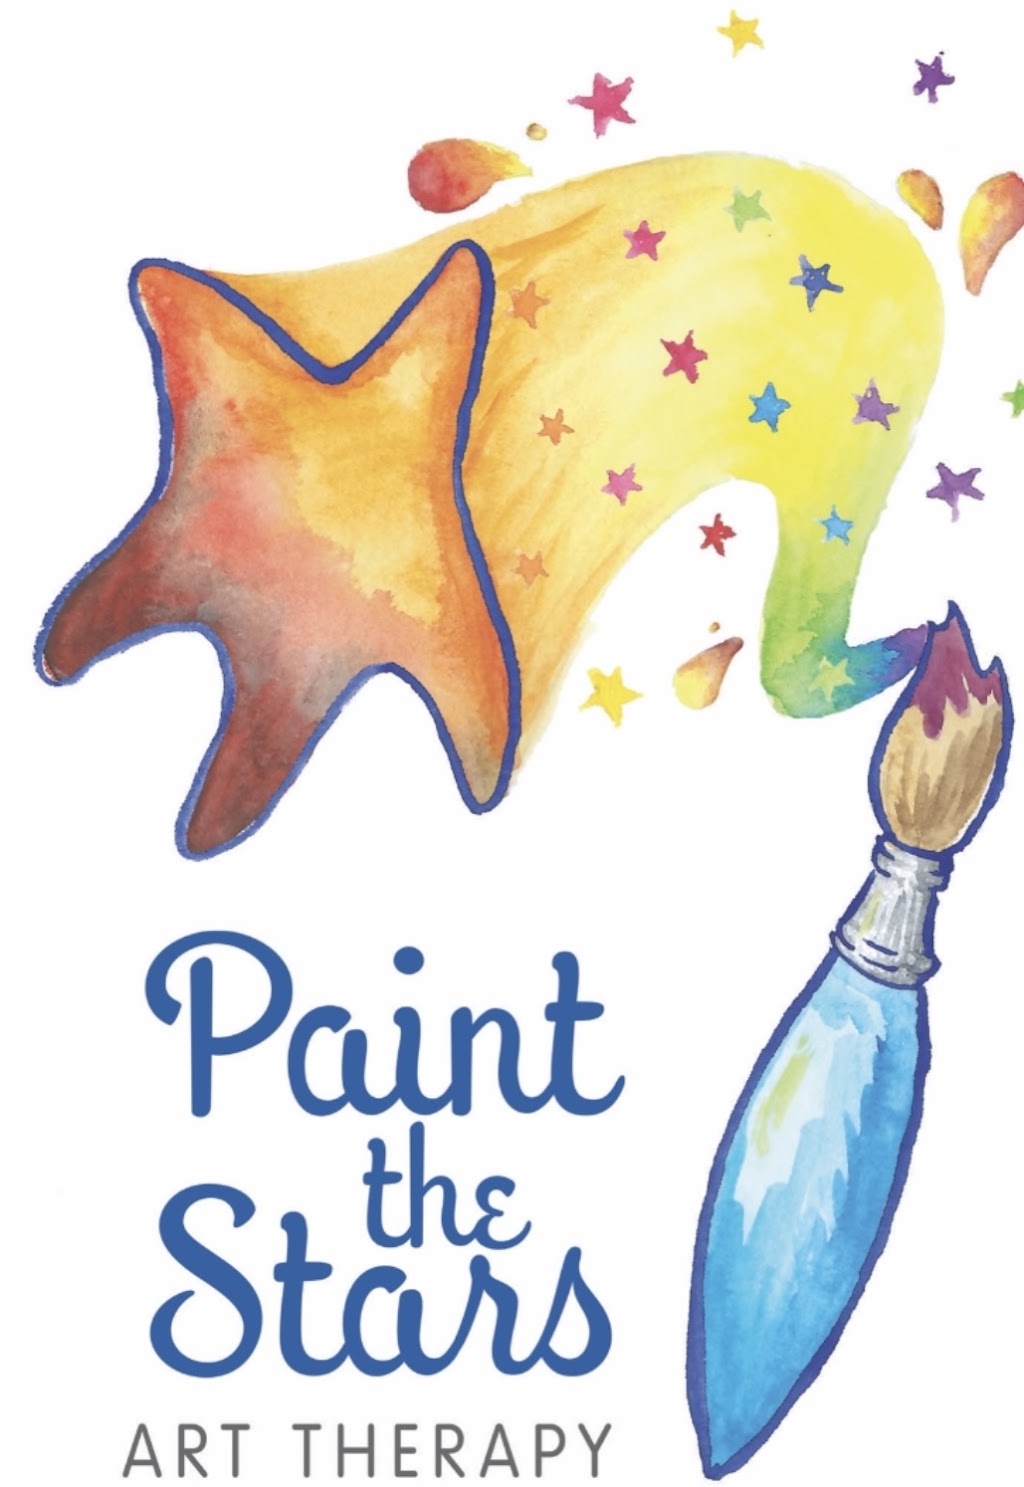 PAINT THE STARS ART THERAPY | 710 Tennent Rd, Manalapan Township, NJ 07726 | Phone: (732) 766-1238